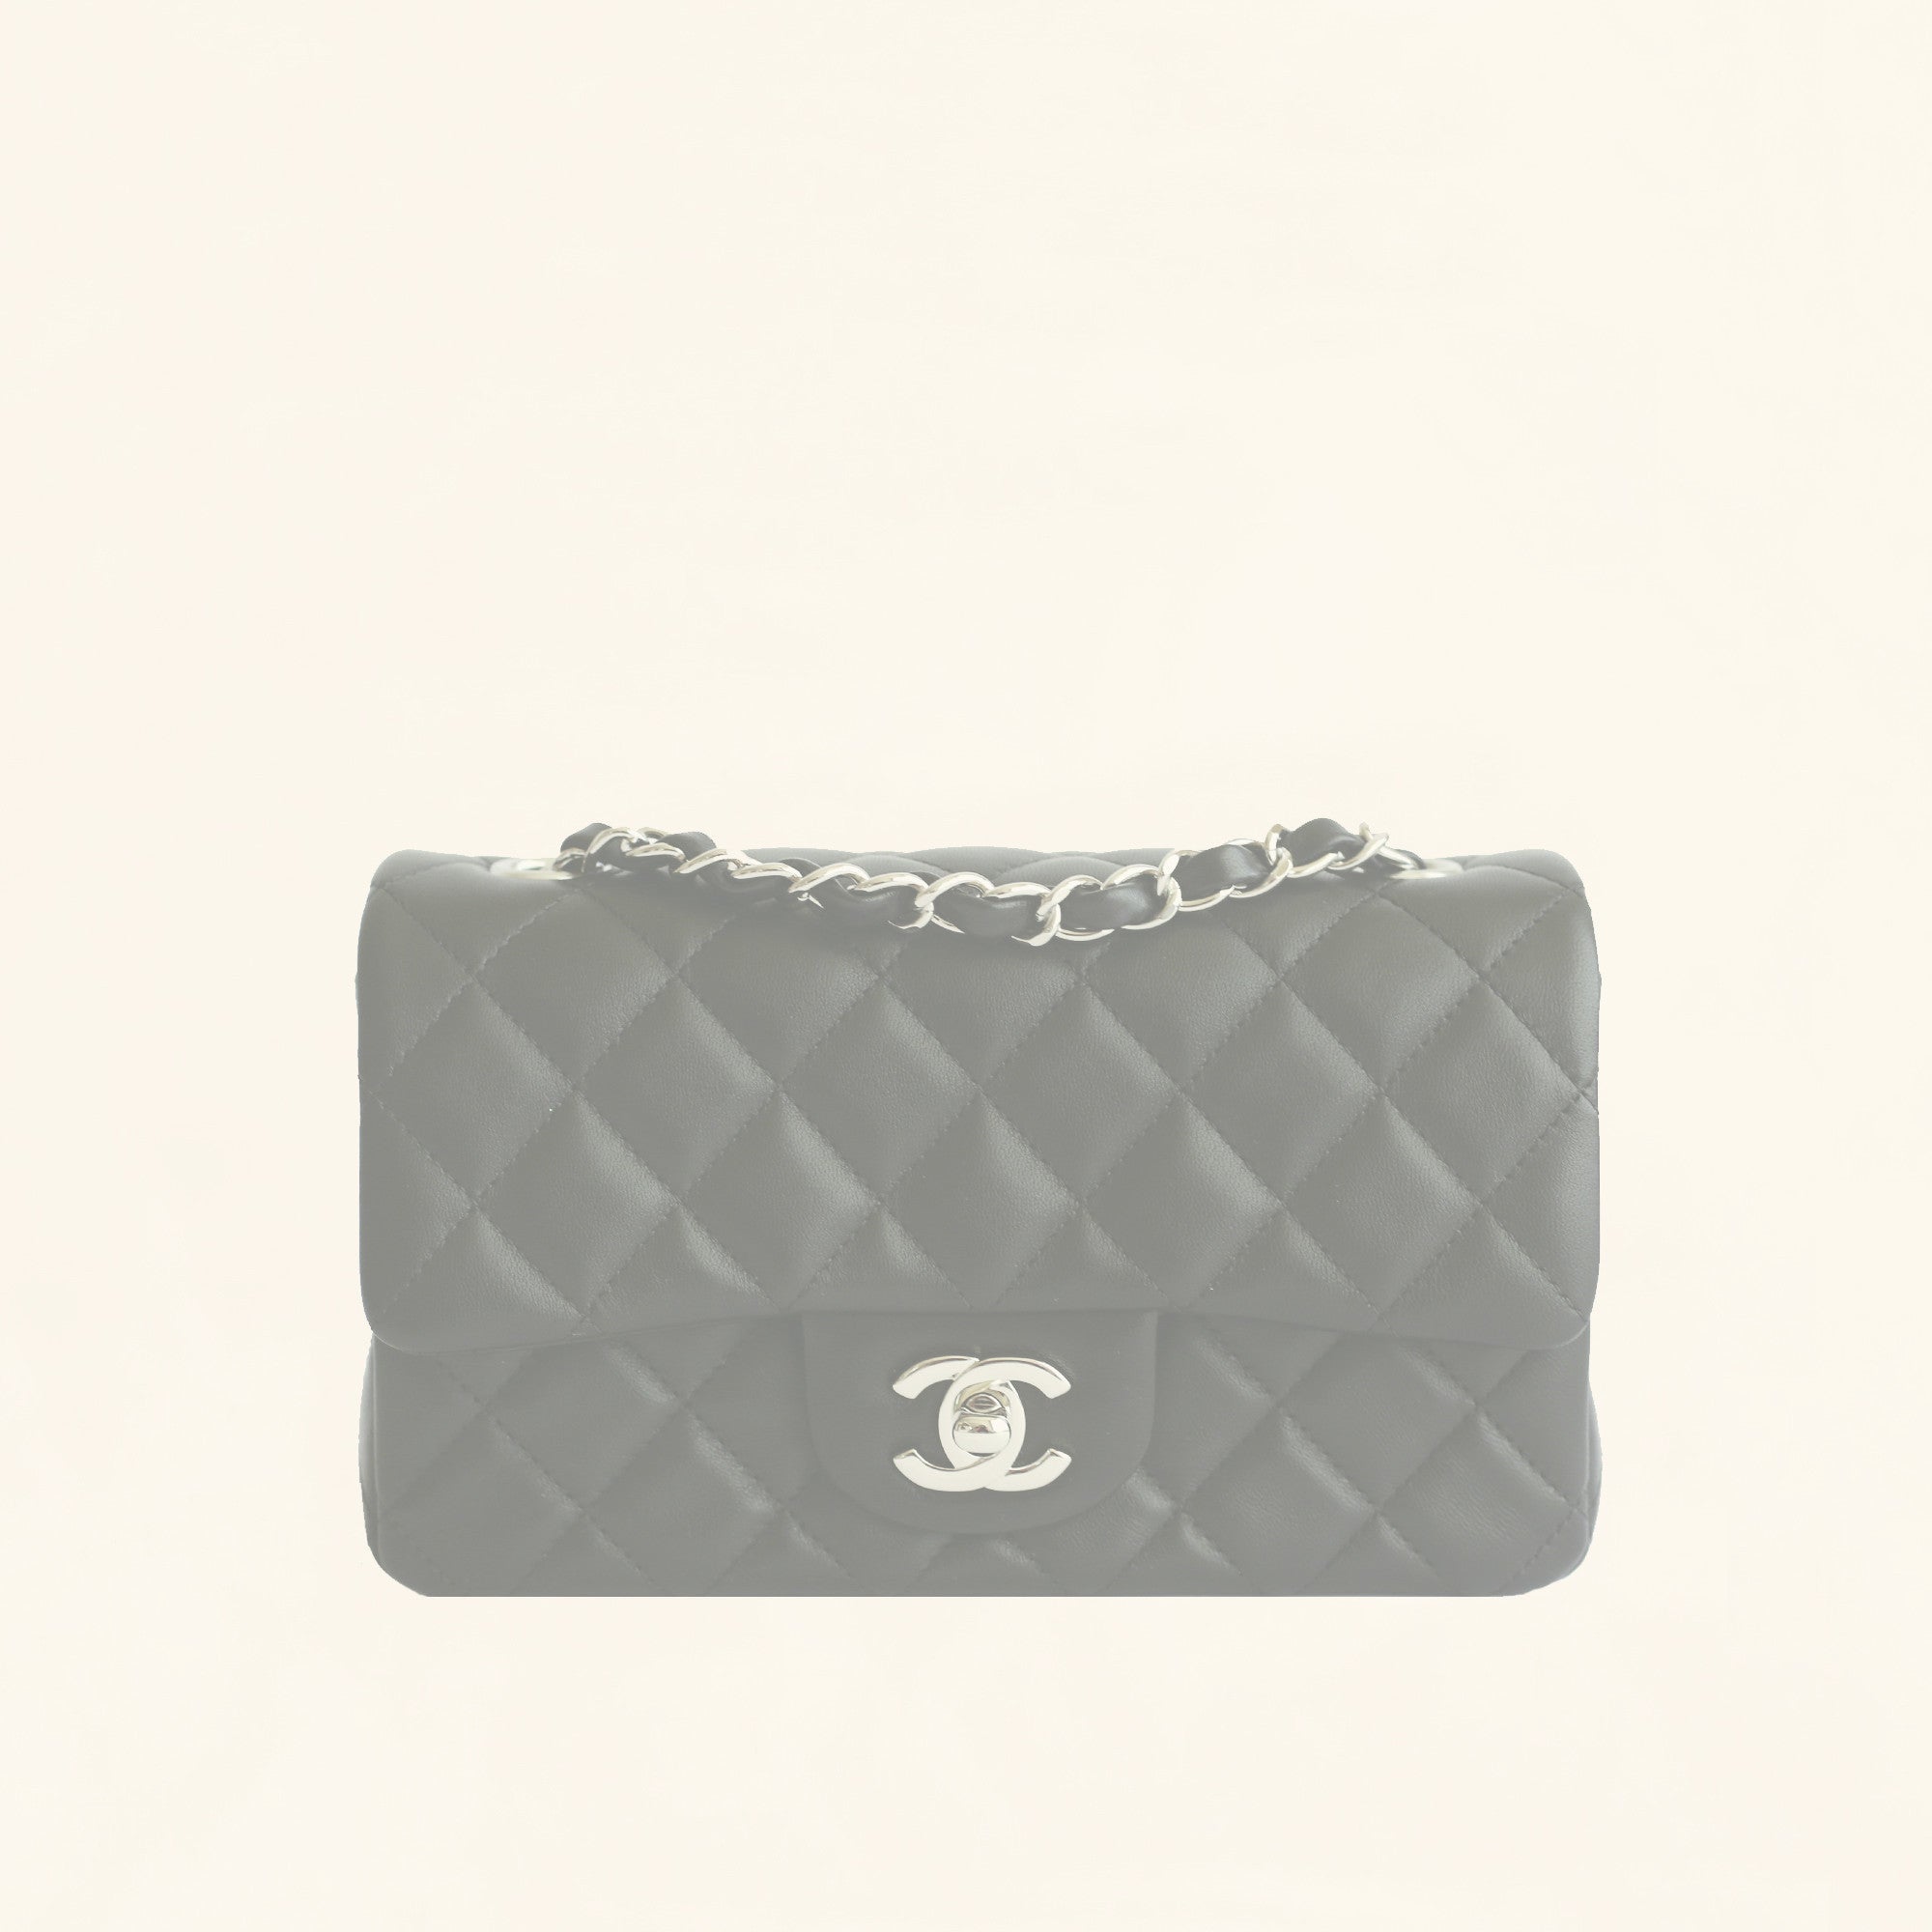 Chanel Soft Lambskin Leather Medium Silver Chain Shoulder Tote Bag